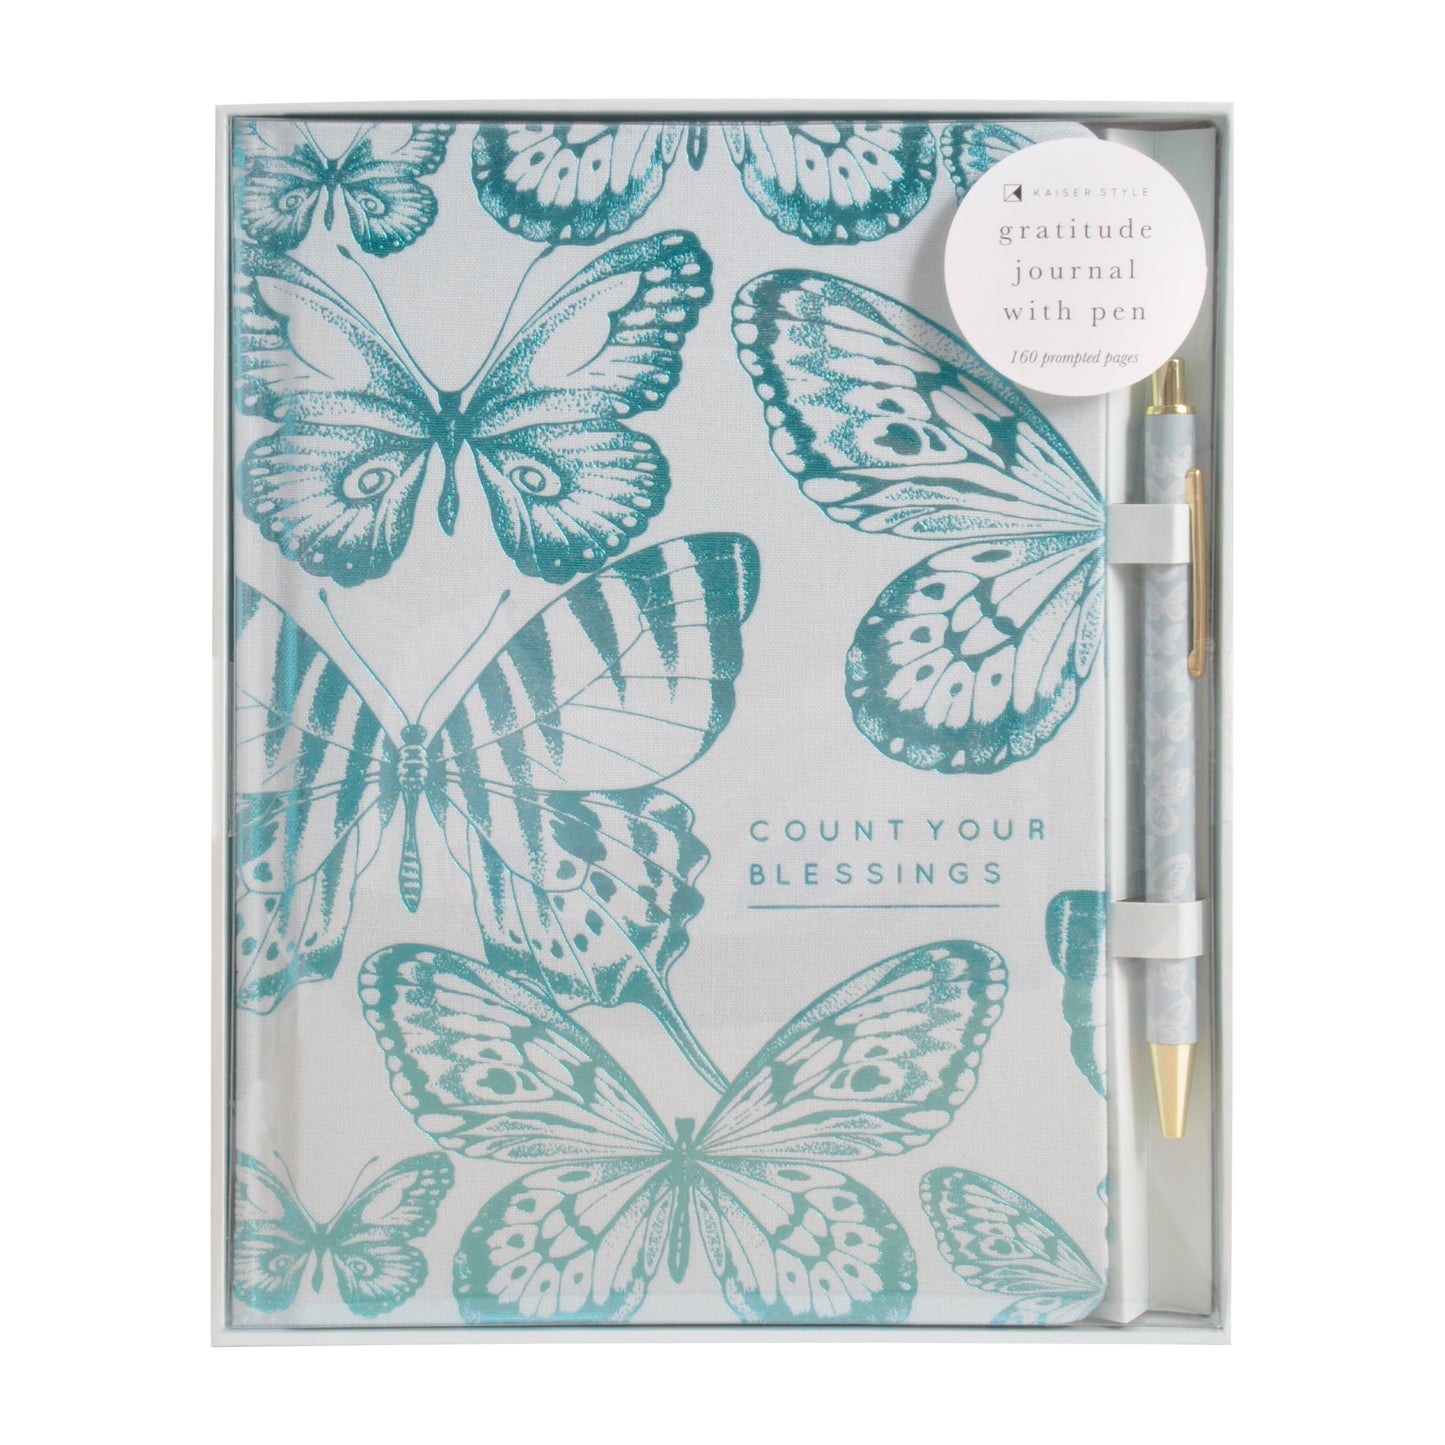 Prompted Journal With Pen - Butterfly Blessings